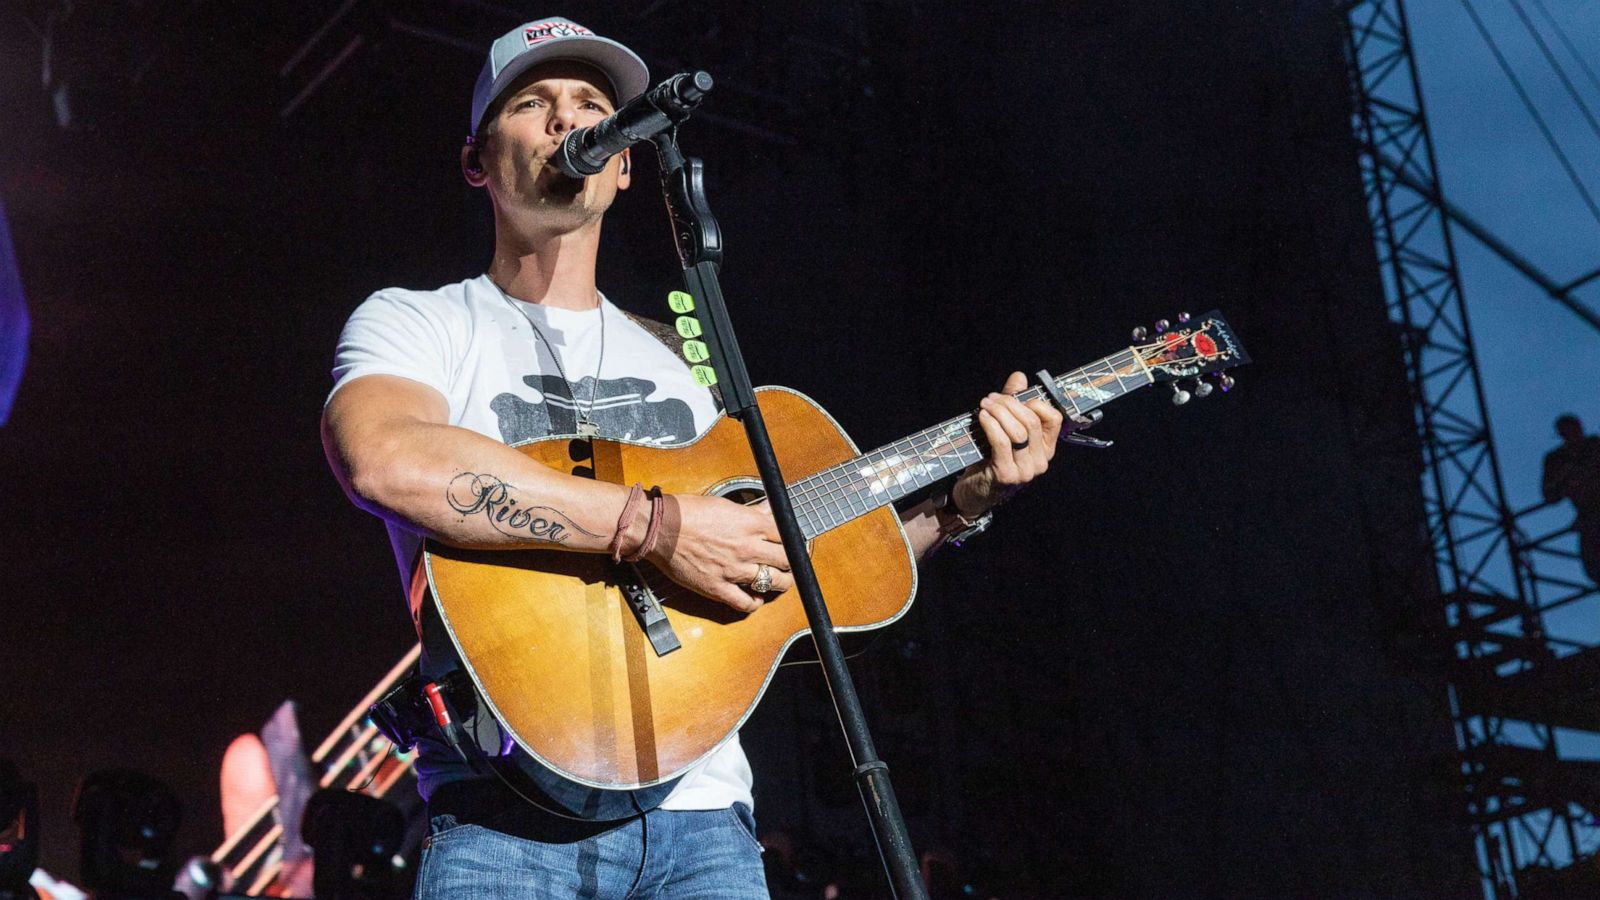 Granger Smith returns to stage, debuts new tattoo in honor of late son,  River - ABC News